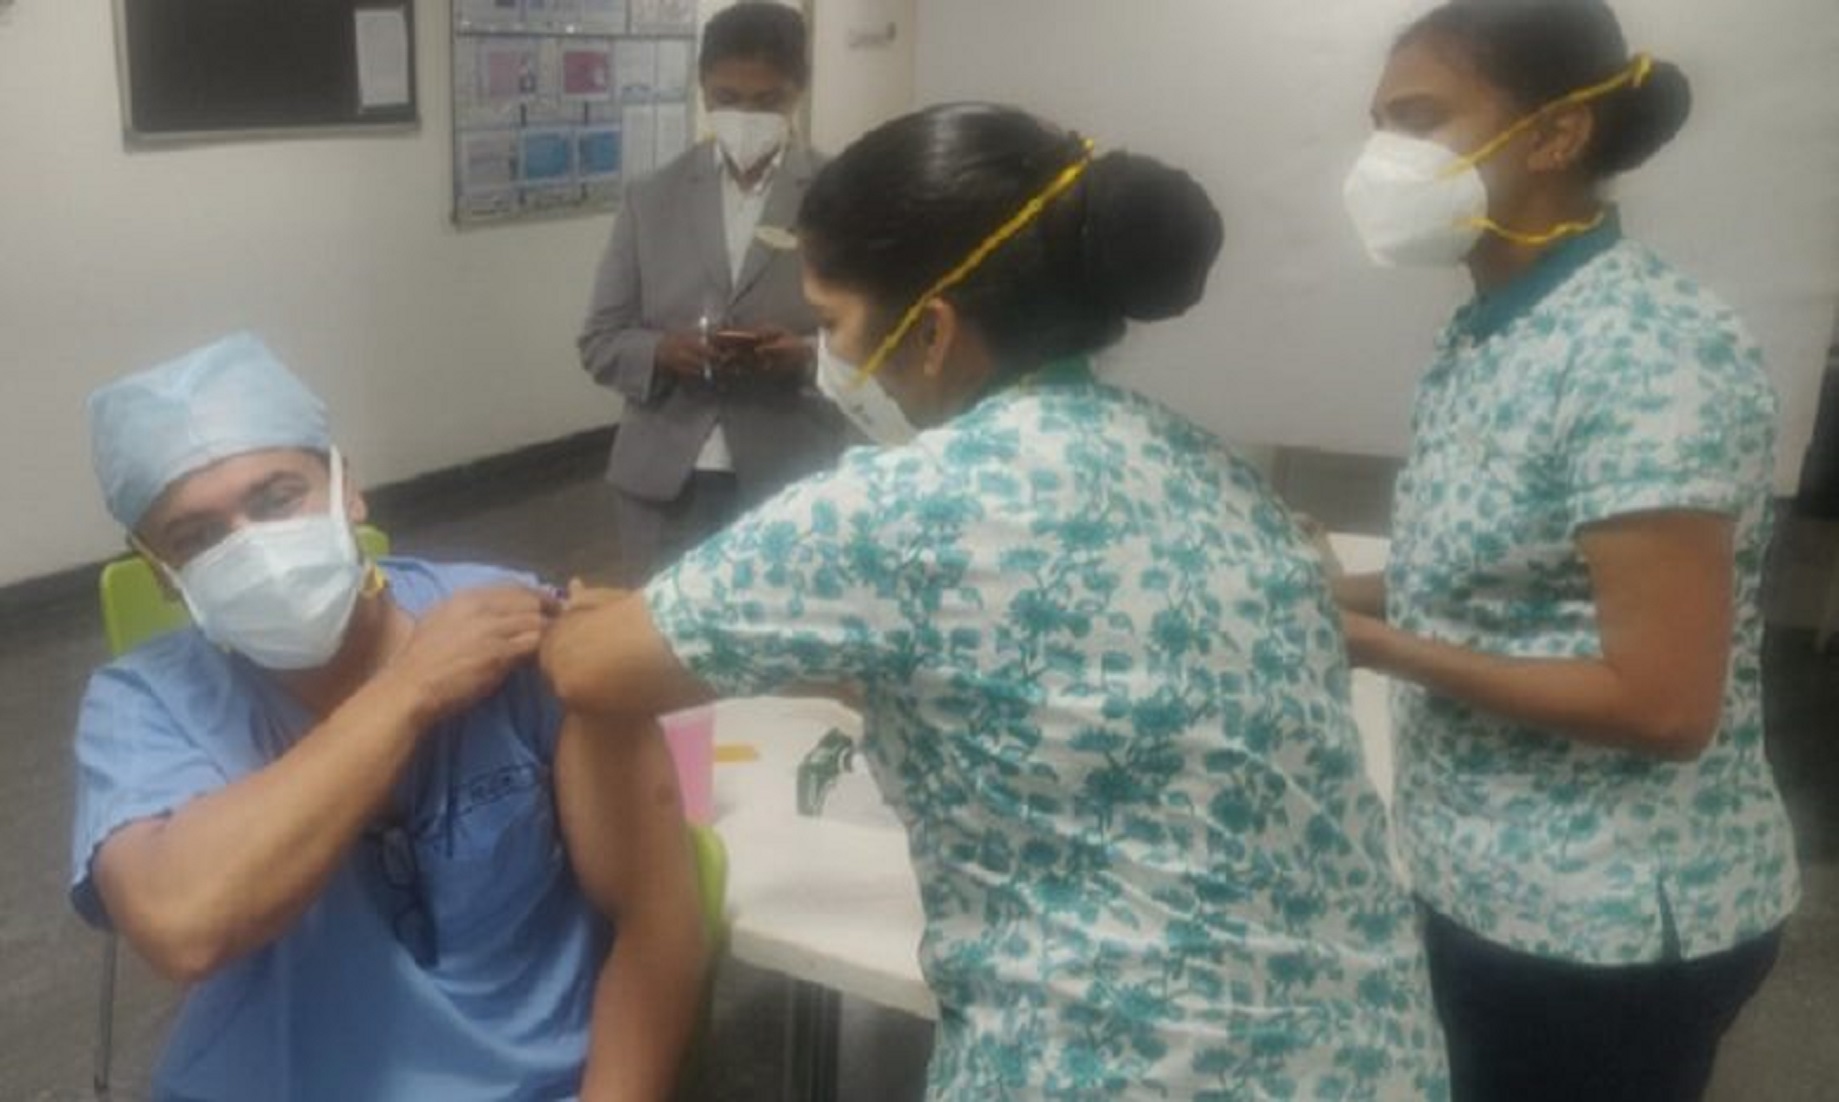 Chinese Nationals In Bangladesh Receive Second Sinopharm Vaccine Doses Under China’s “Spring Sprout” Programme